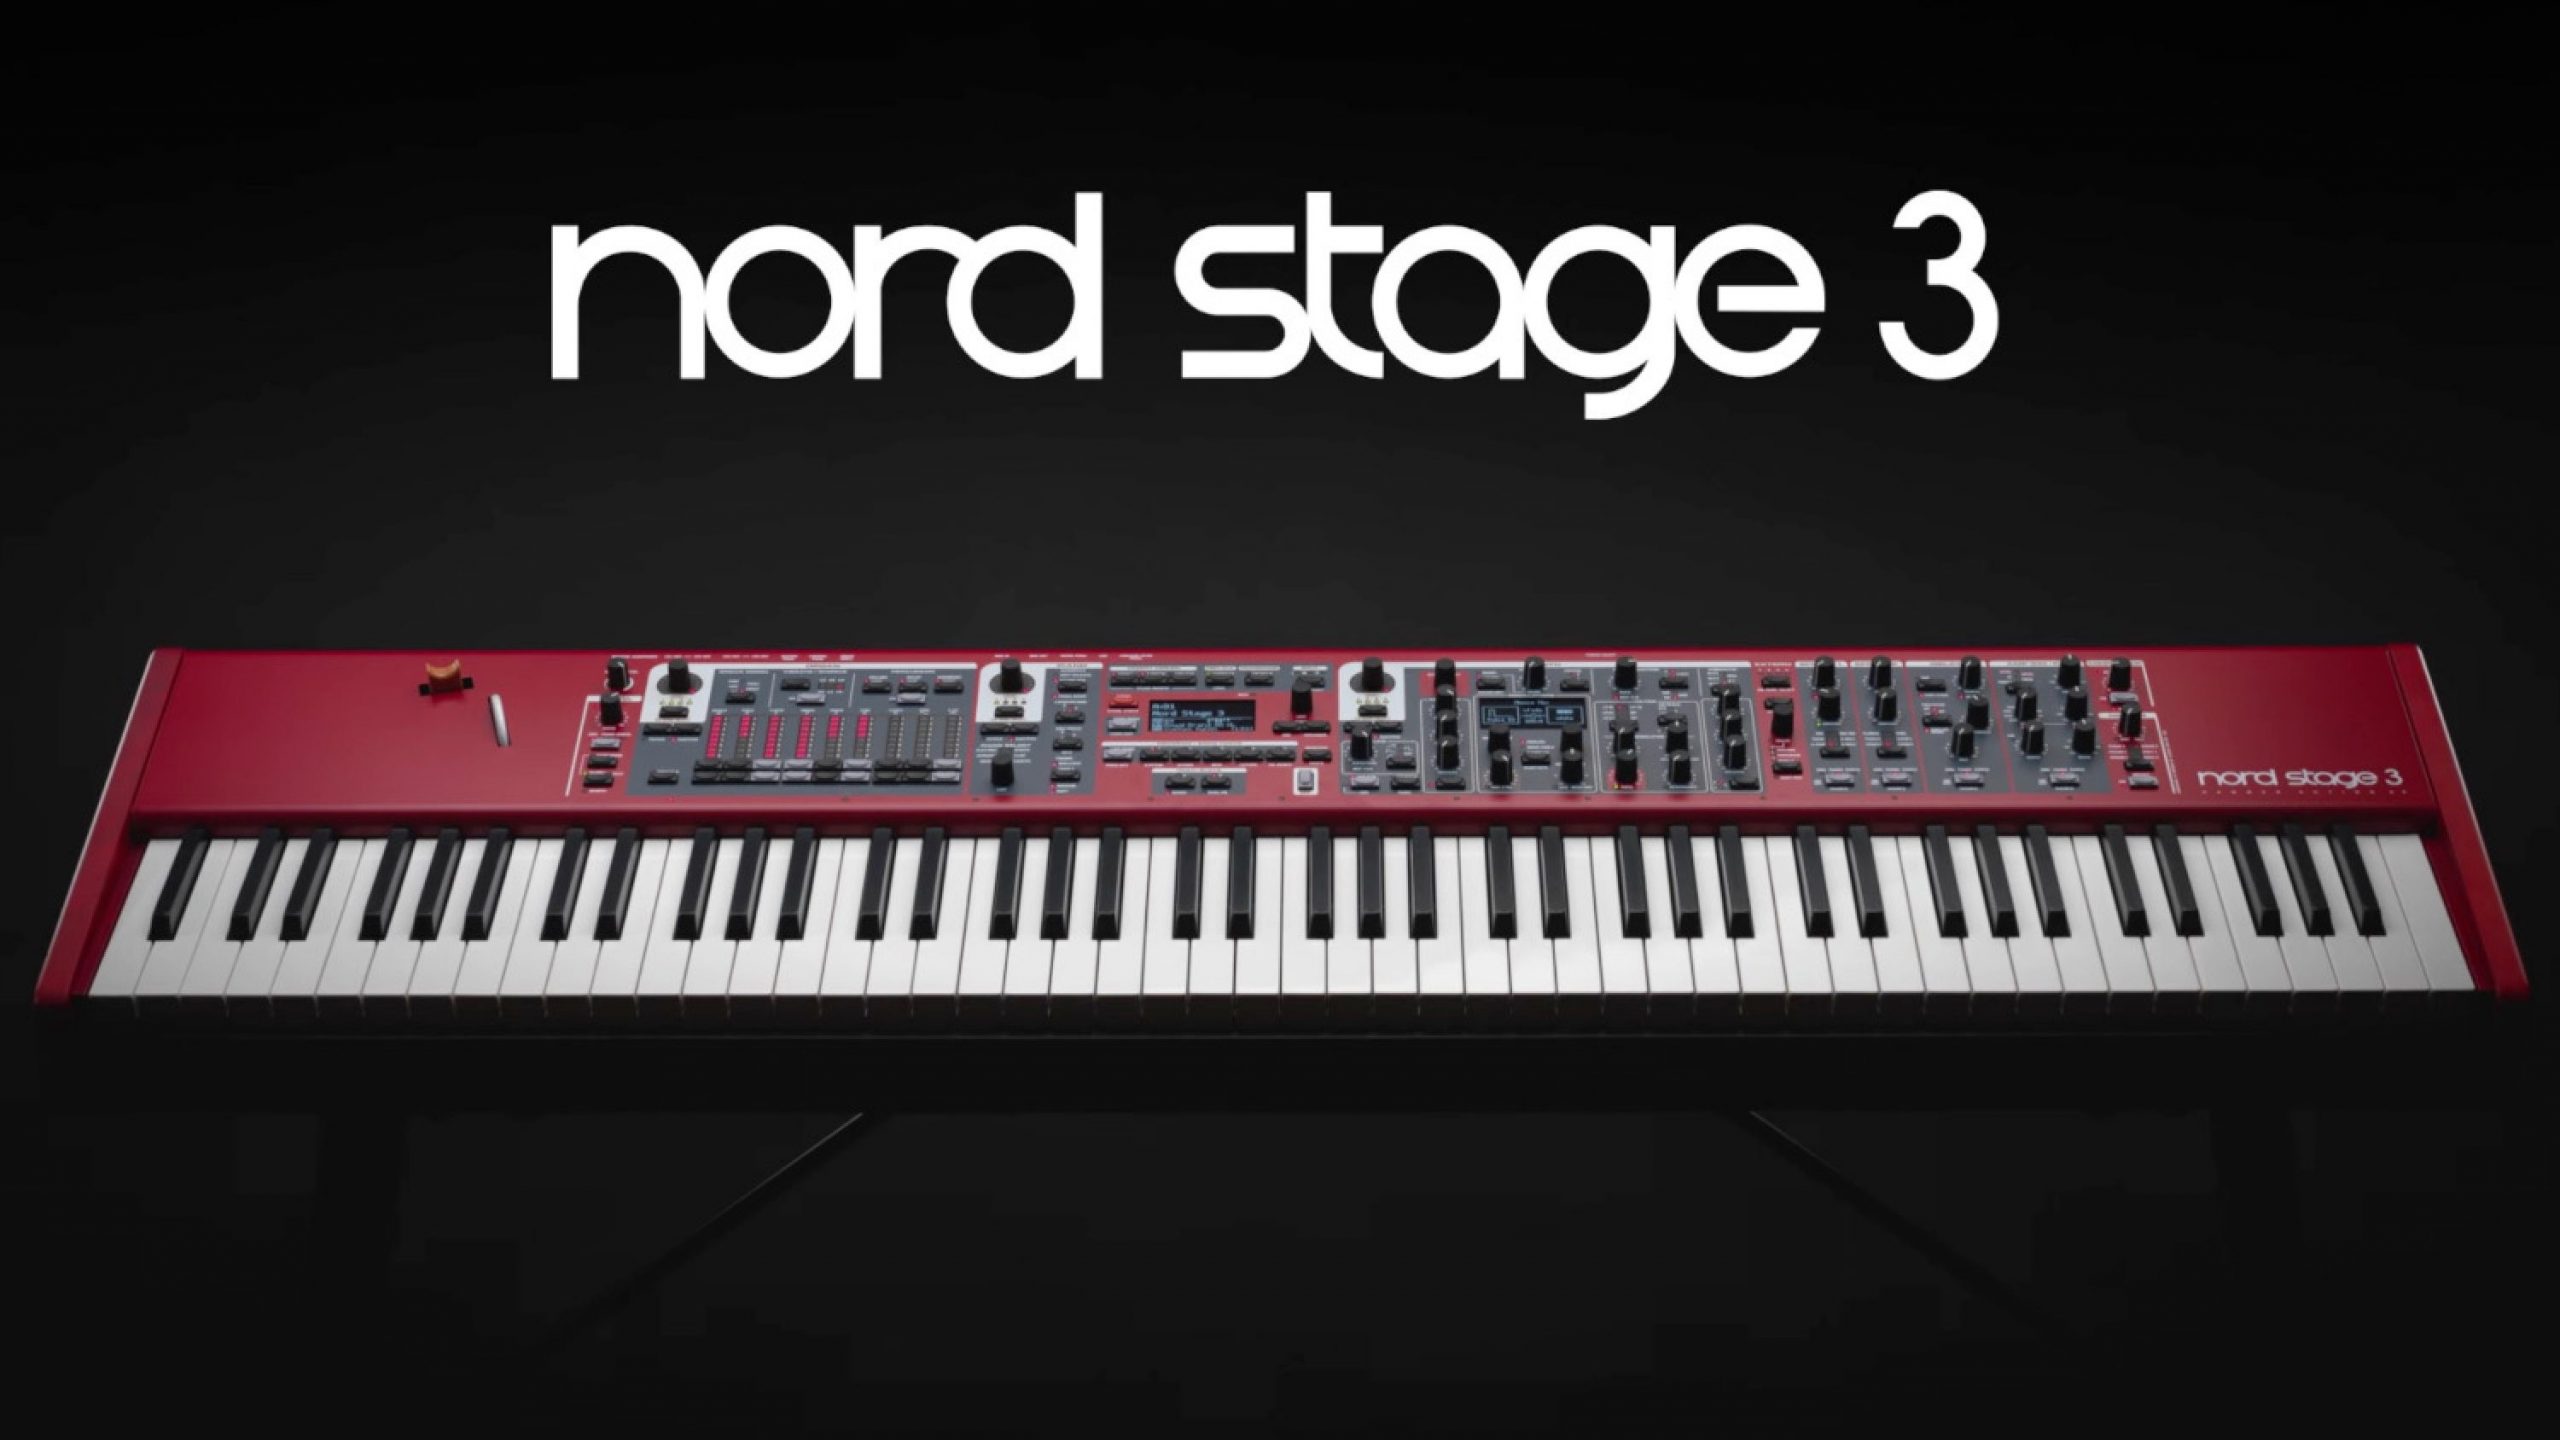 stage piano